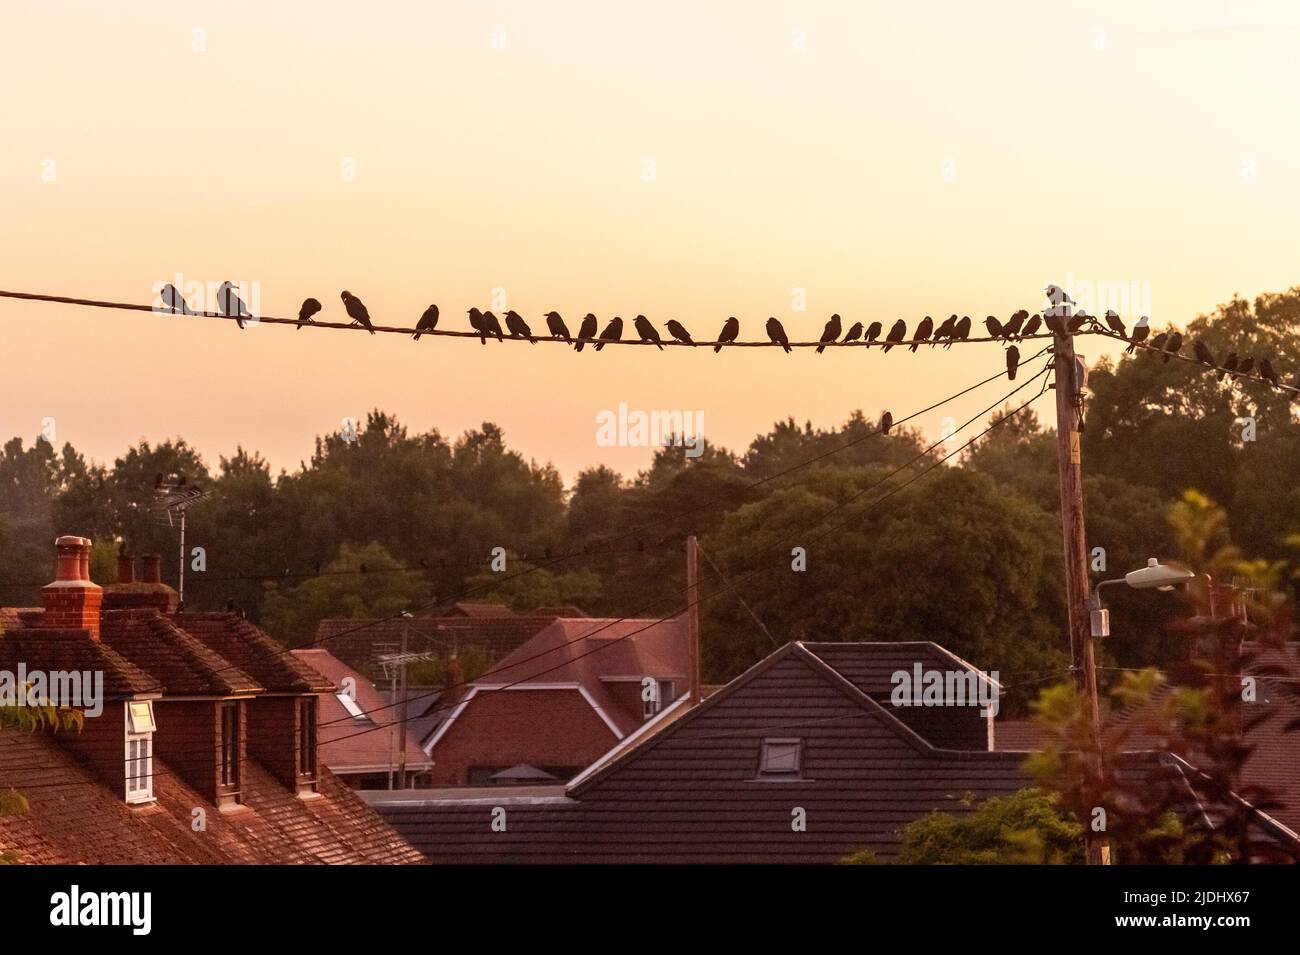 Birds on a wire at summer solstice sunrise Stock Photo